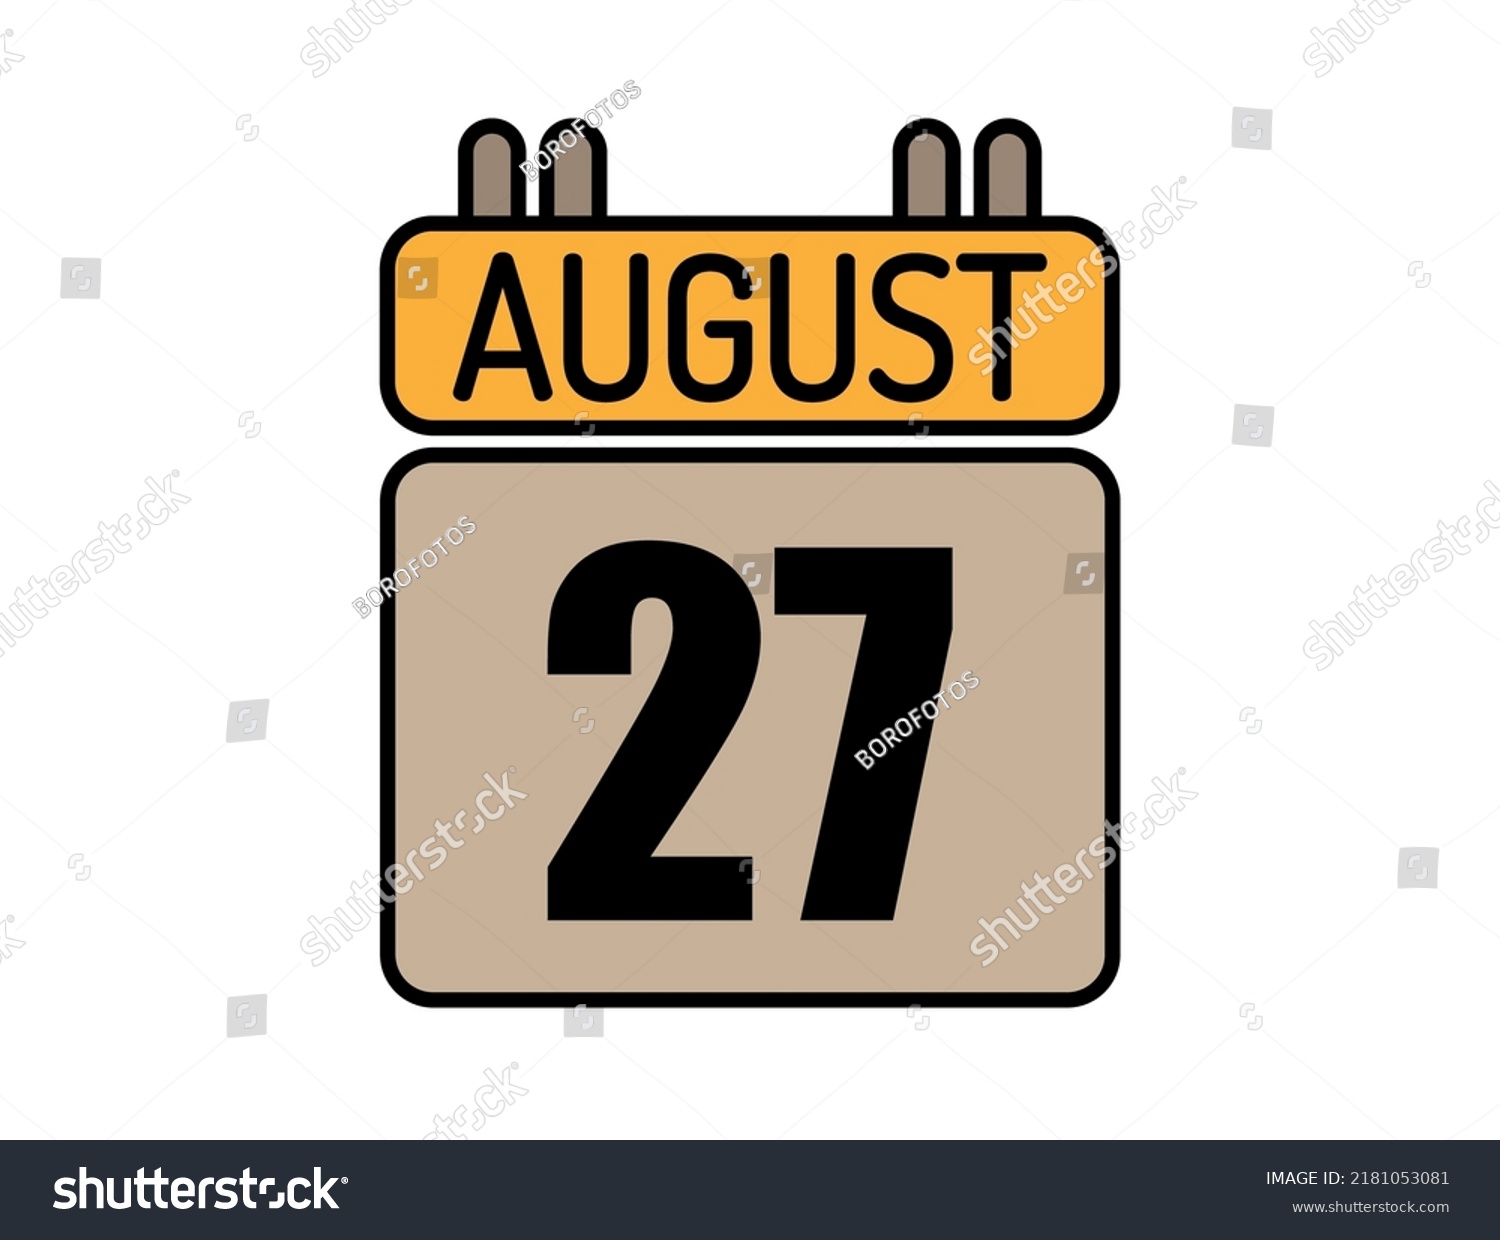 SVG of Day 27 August calendar icon. Calendar vector for August days isolated on white background. svg